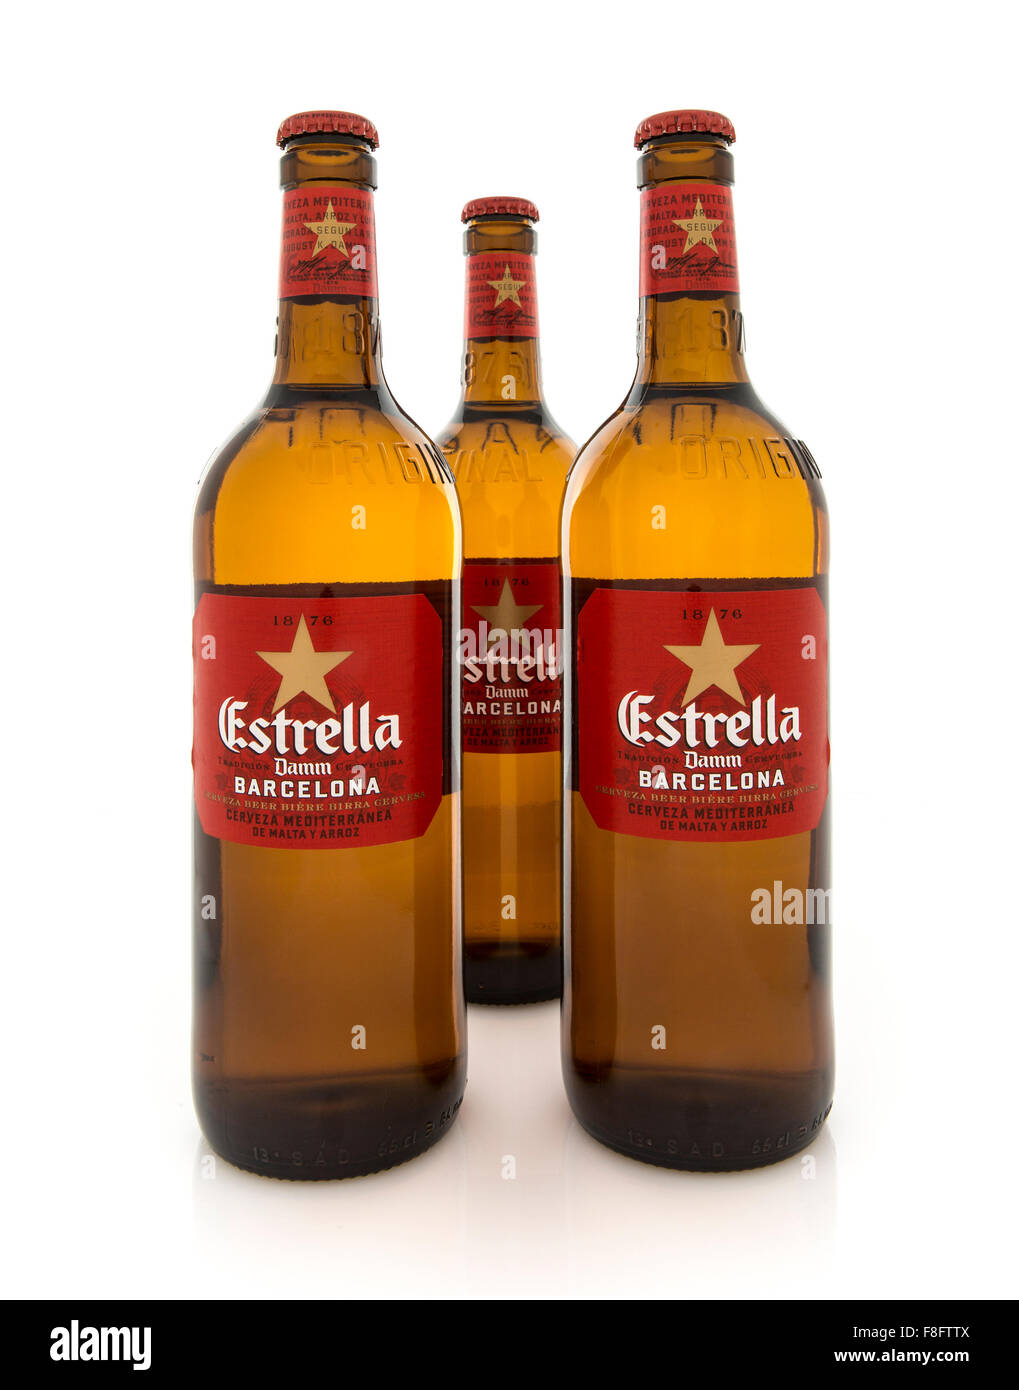 Three Bottles of Estrella Damm beer on on a White Background Stock Photo